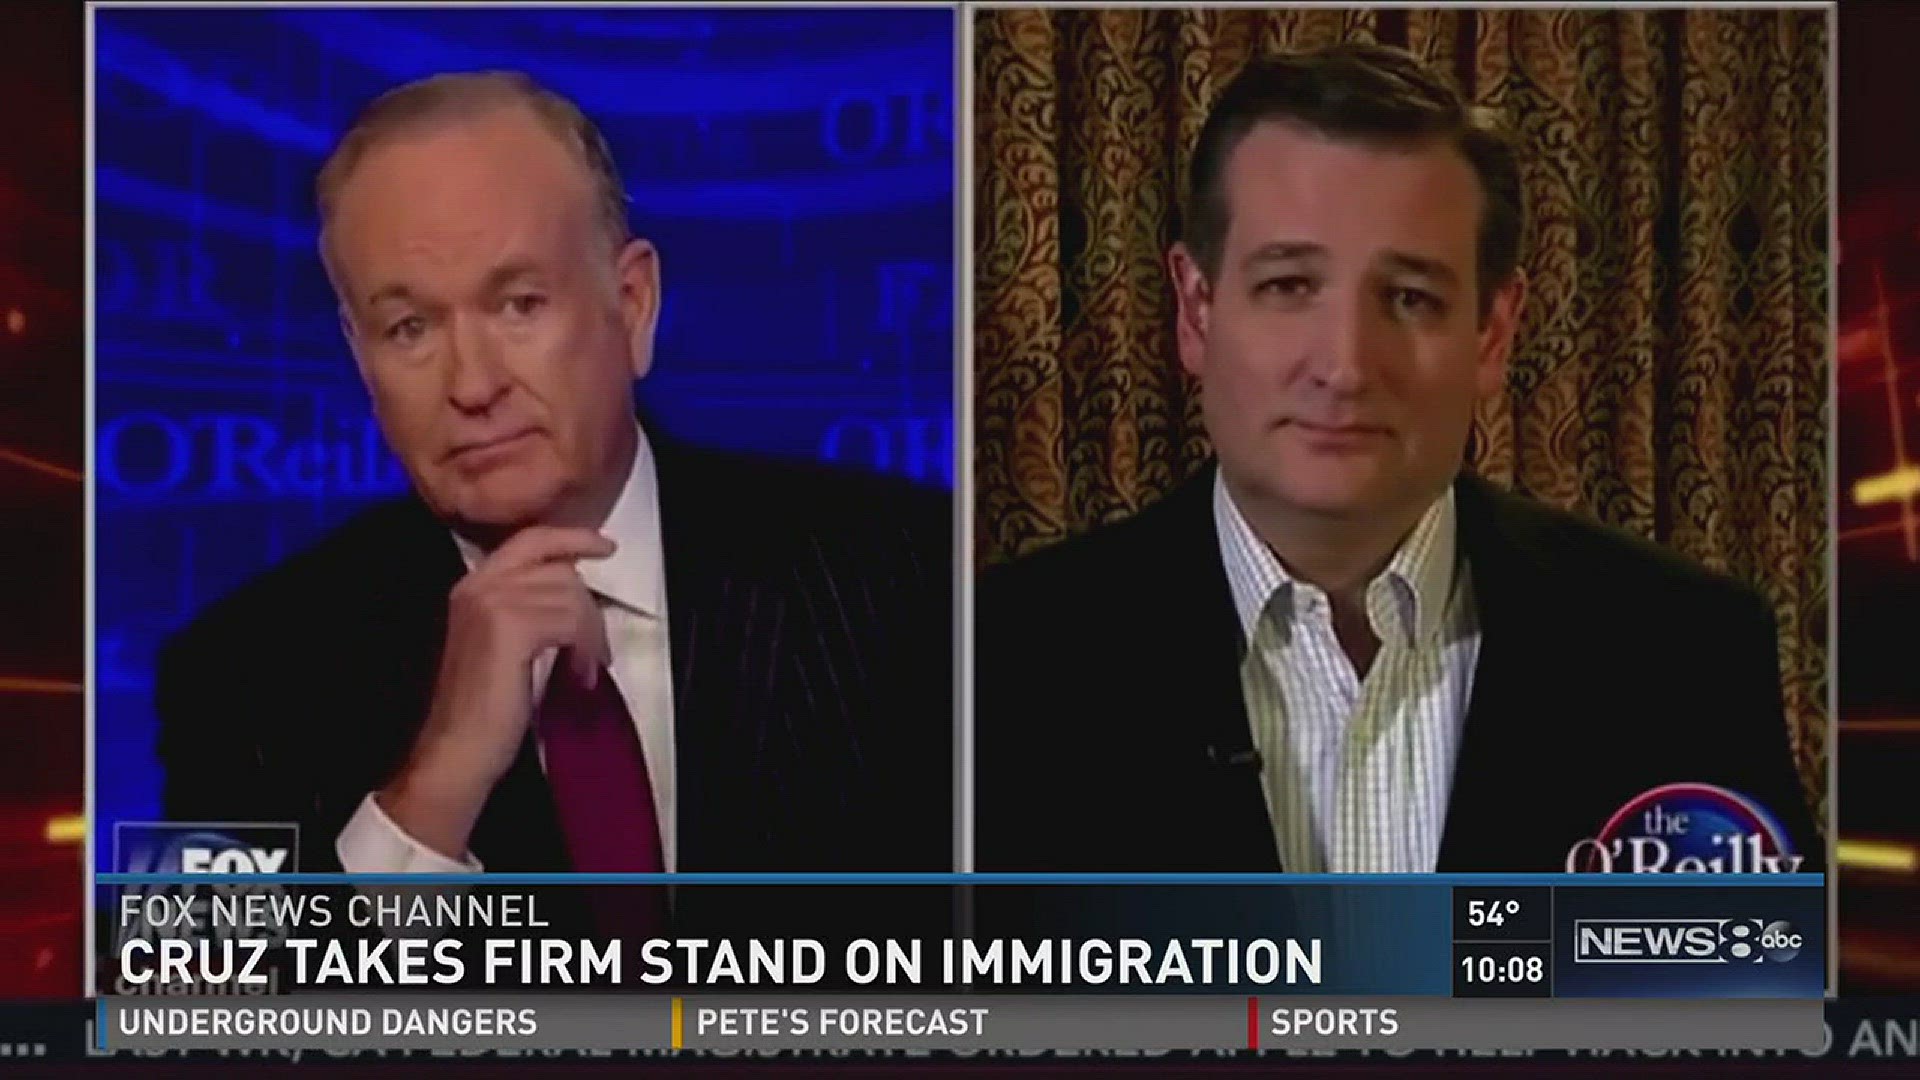 Ted Cruz appeared to toughen his stance on undocumented immigrants in an interview with Bill O'Reilly Monday  night.